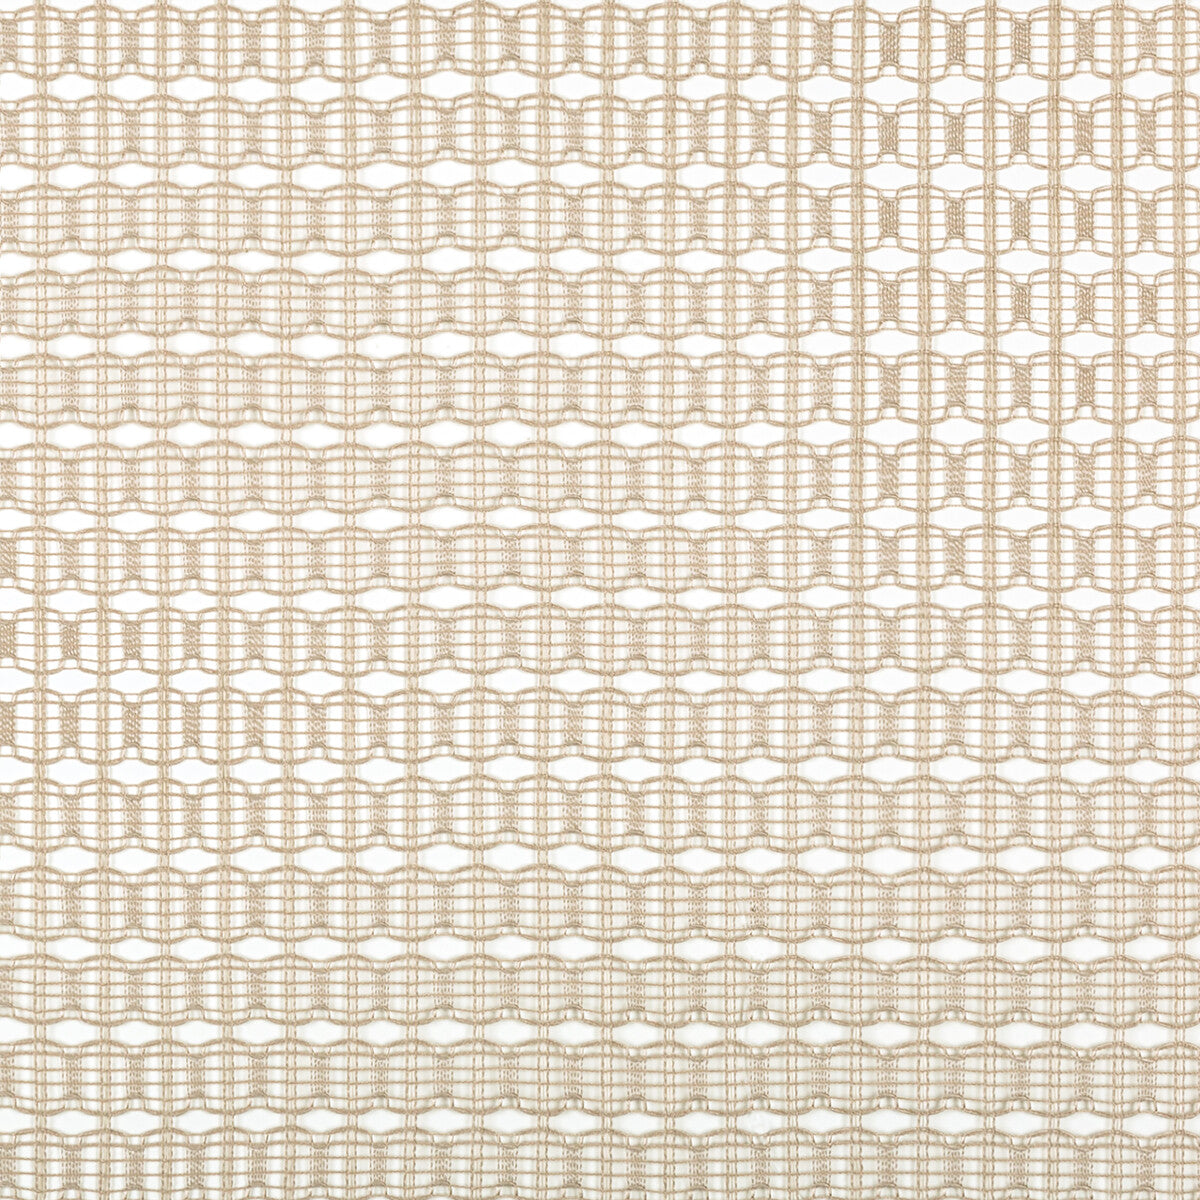 Cast On fabric in linen color - pattern 4822.16.0 - by Kravet Contract